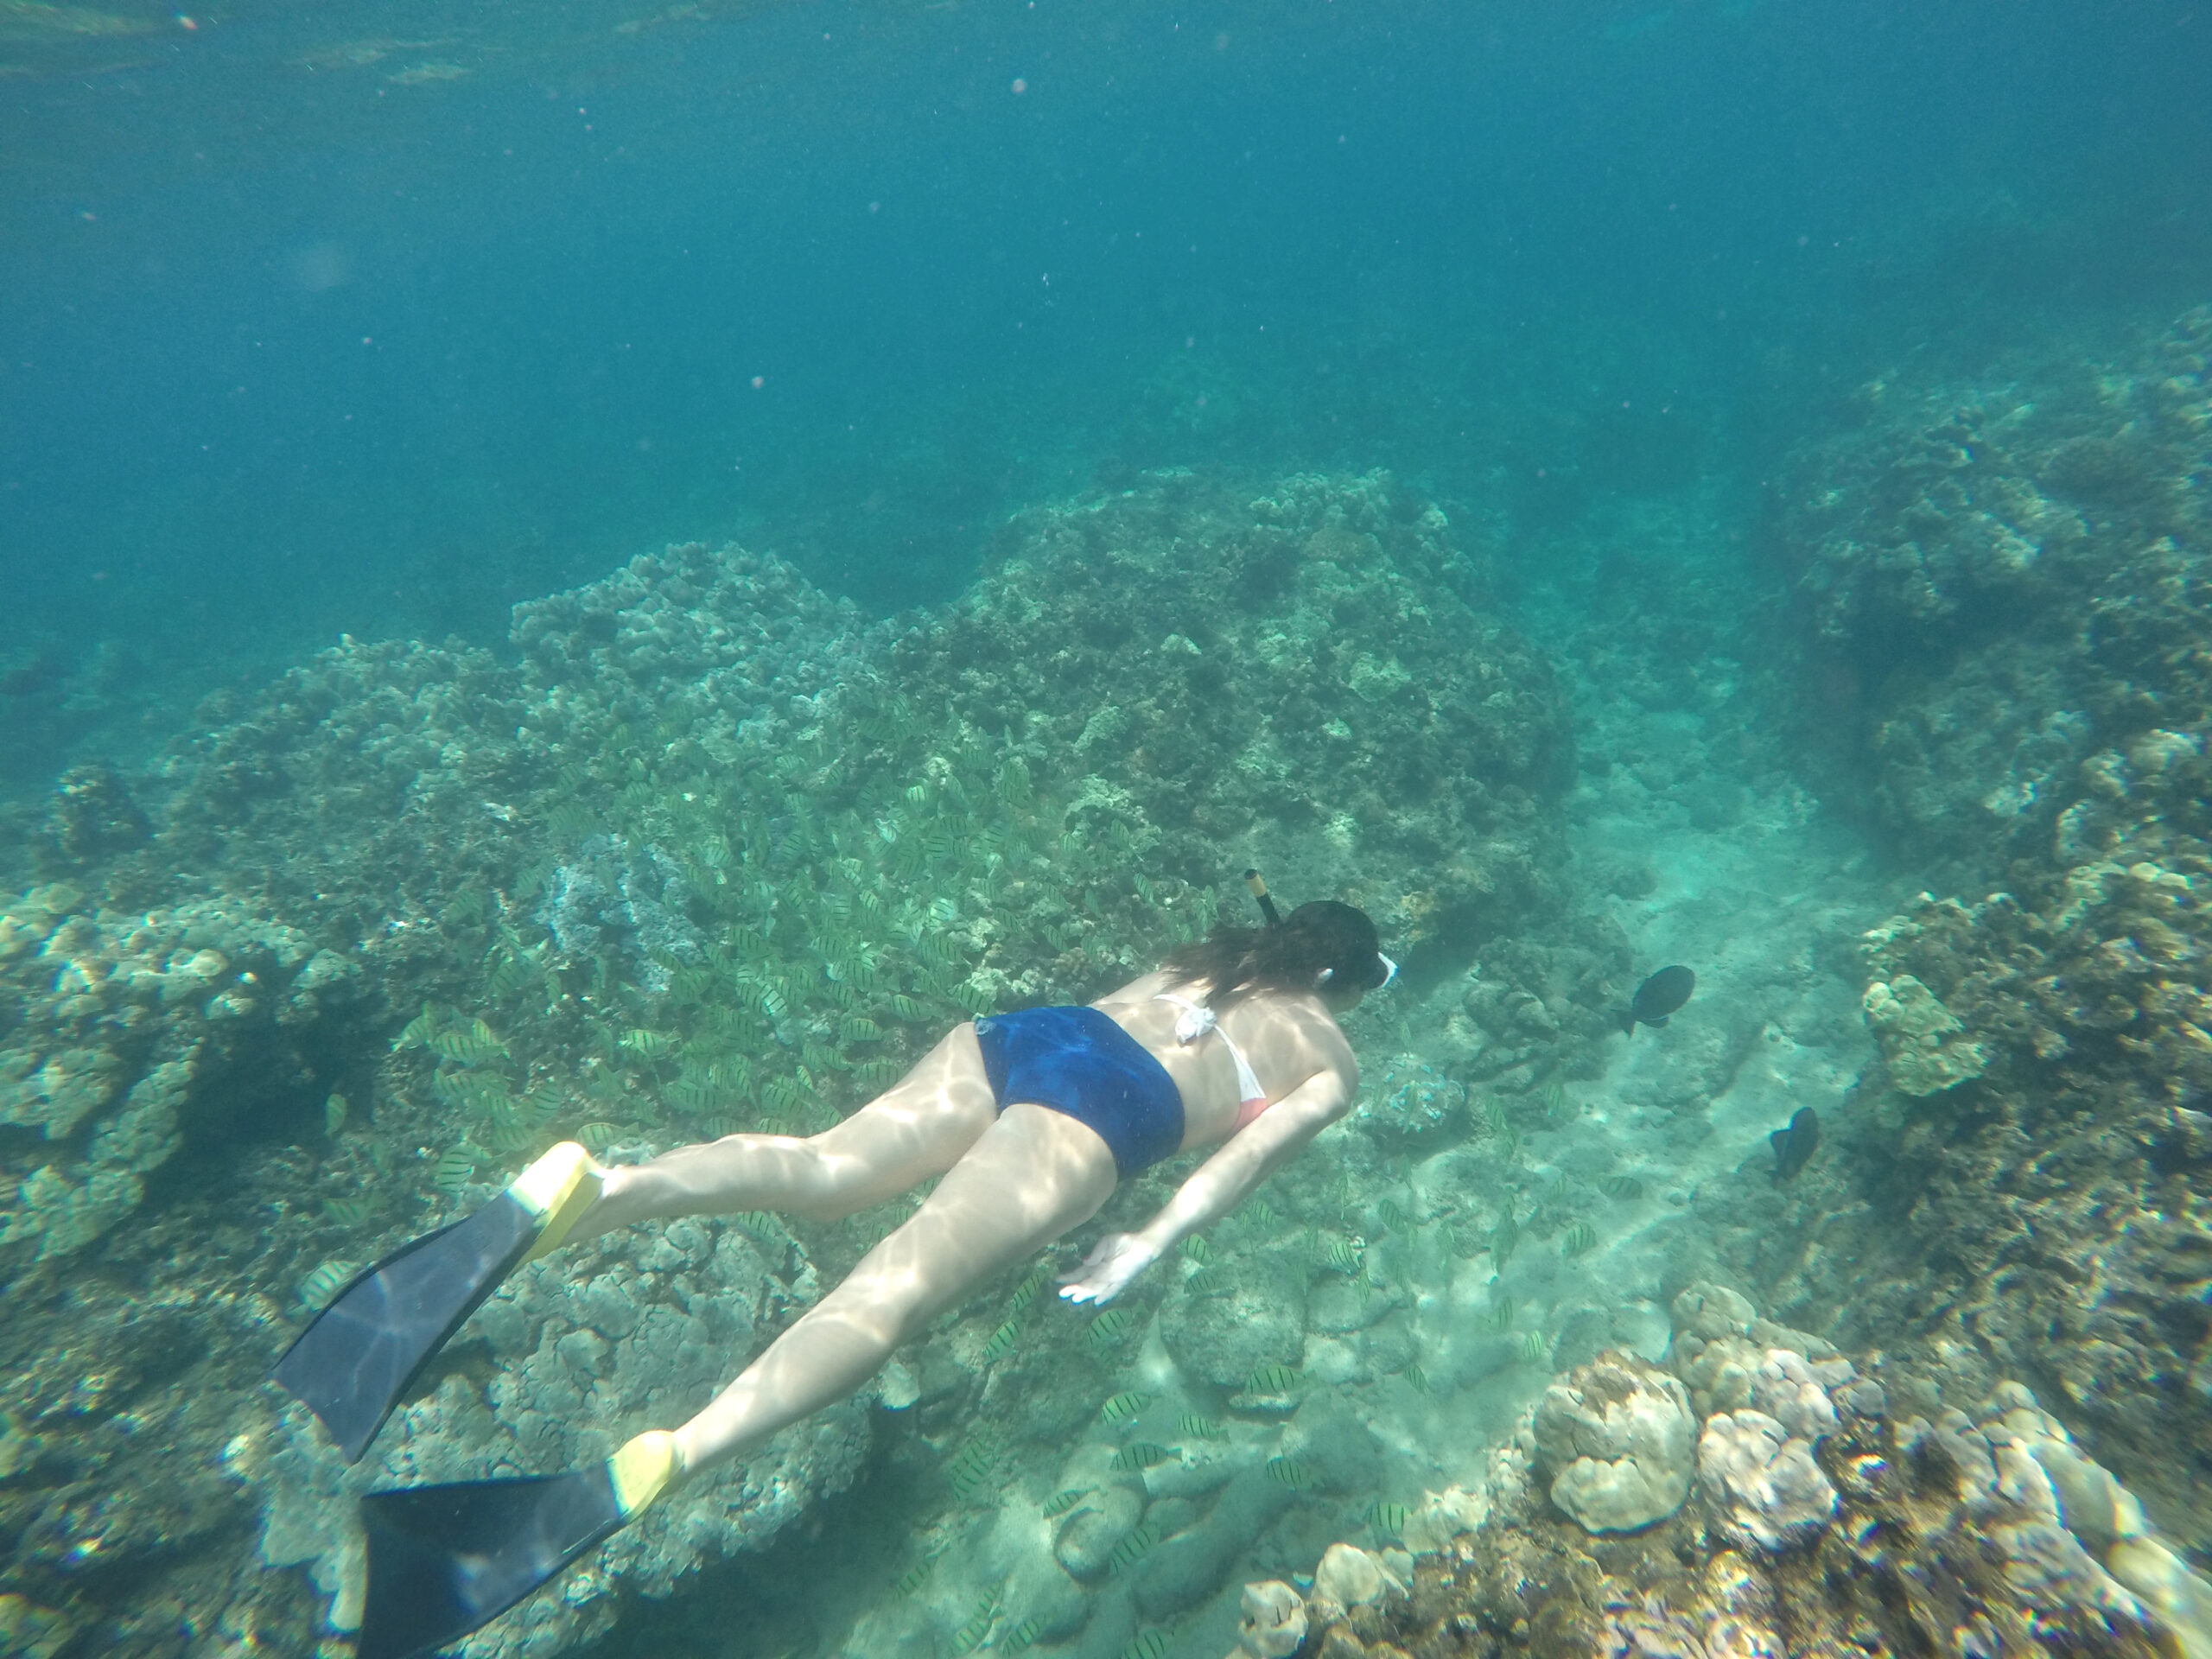 Brittney Naylor snorkeling in the waters of Maui, Hawaii